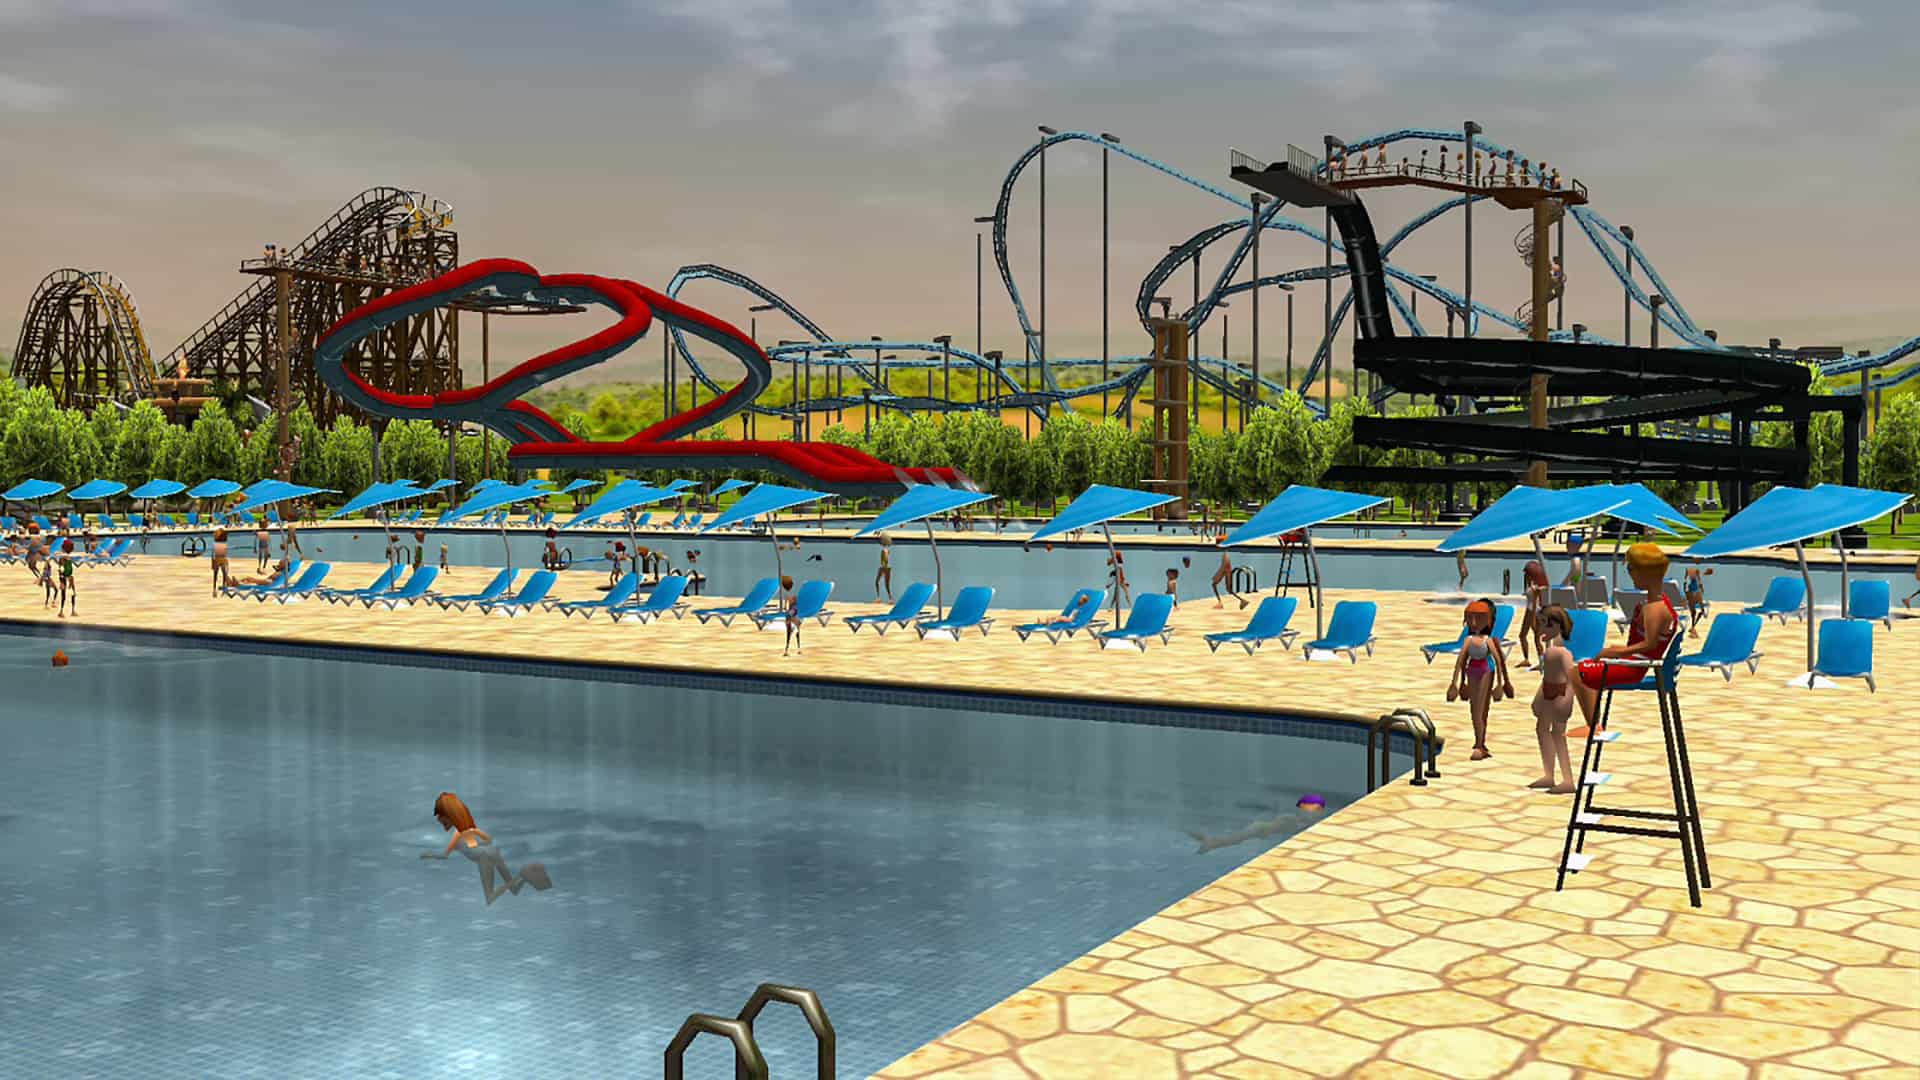 RollerCoaster Tycoon 3 download frei pc